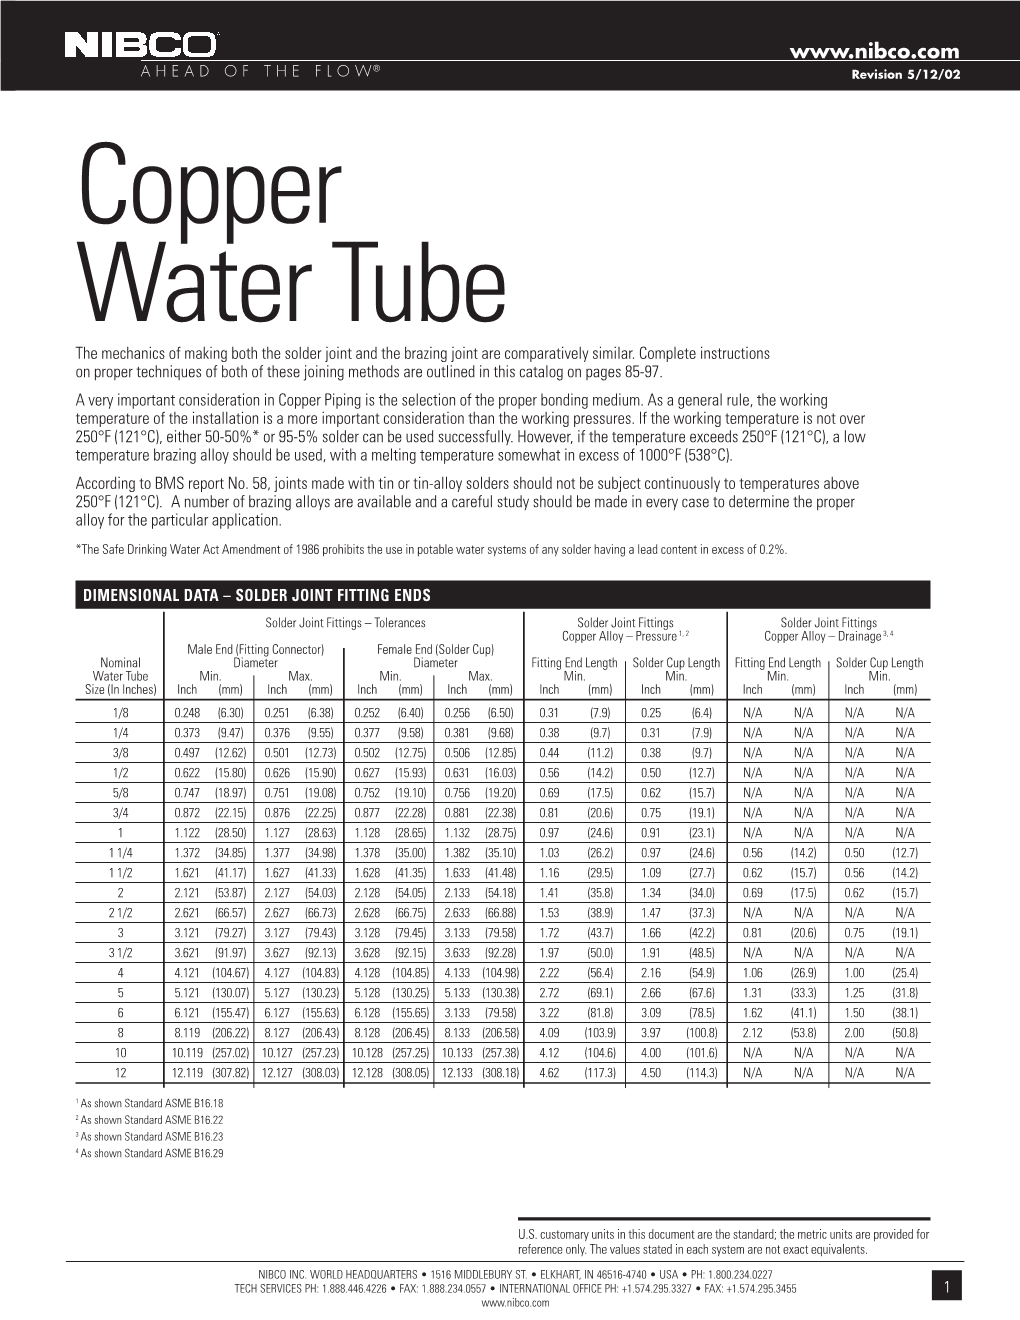 Copper Water Tube.Indd